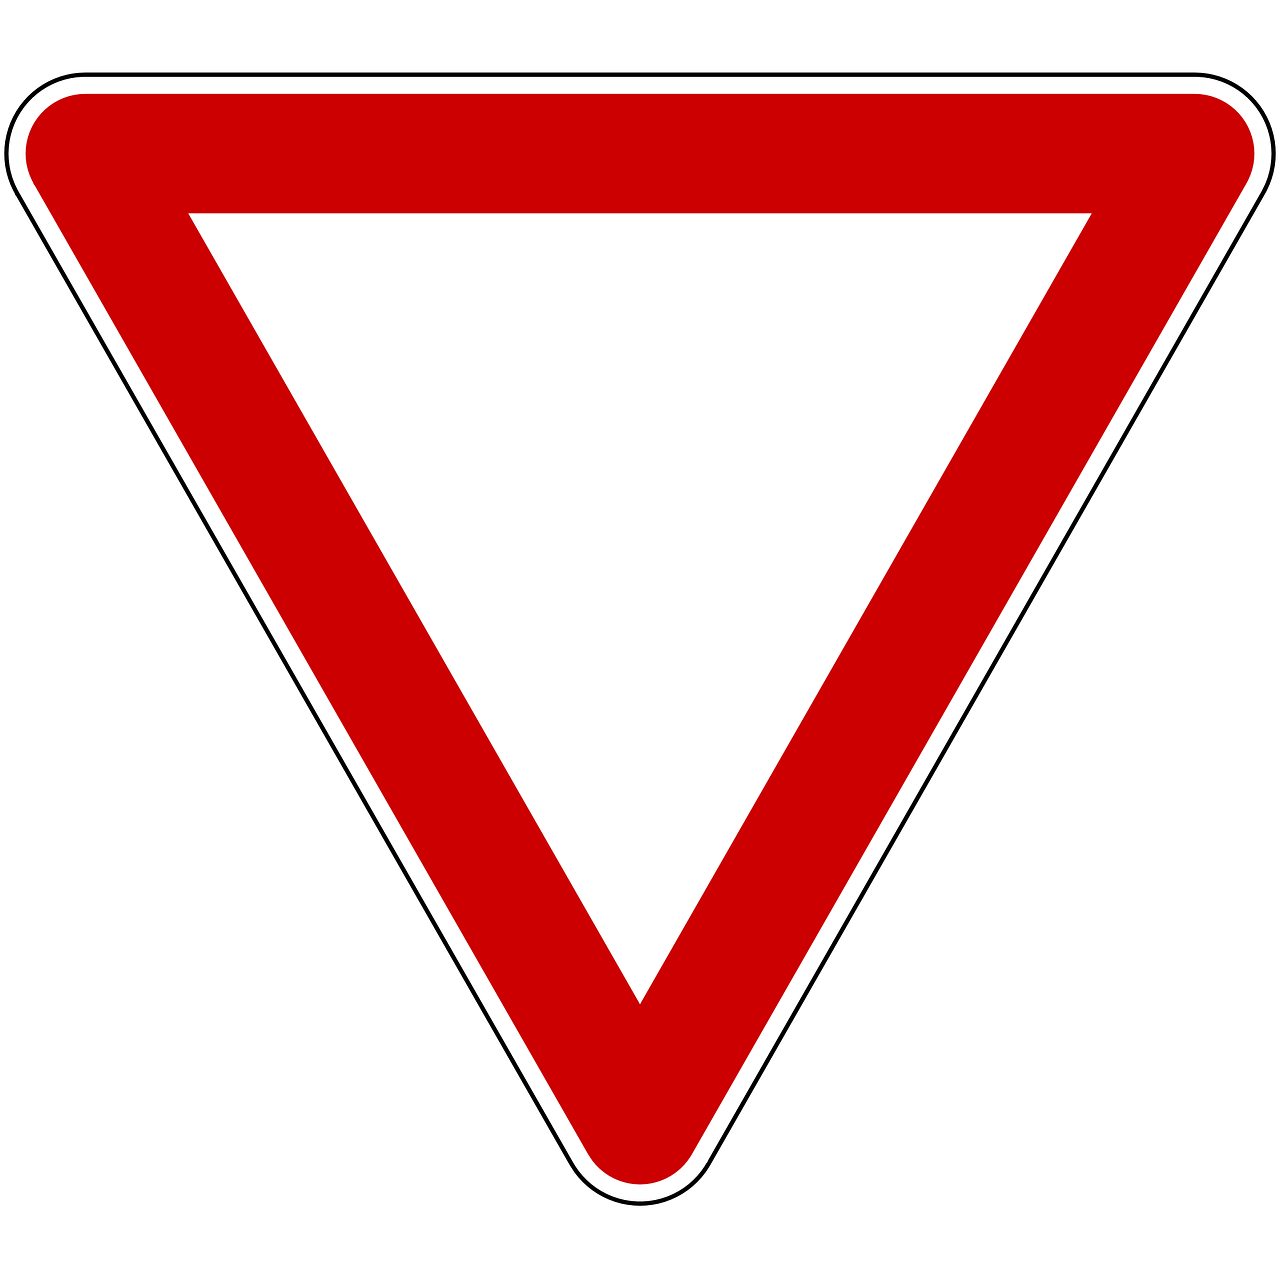 a red and white triangular sign on a black background, by Thomas de Keyser, pixabay, bauhaus, driver, rivers, white borders, valeriy vegera